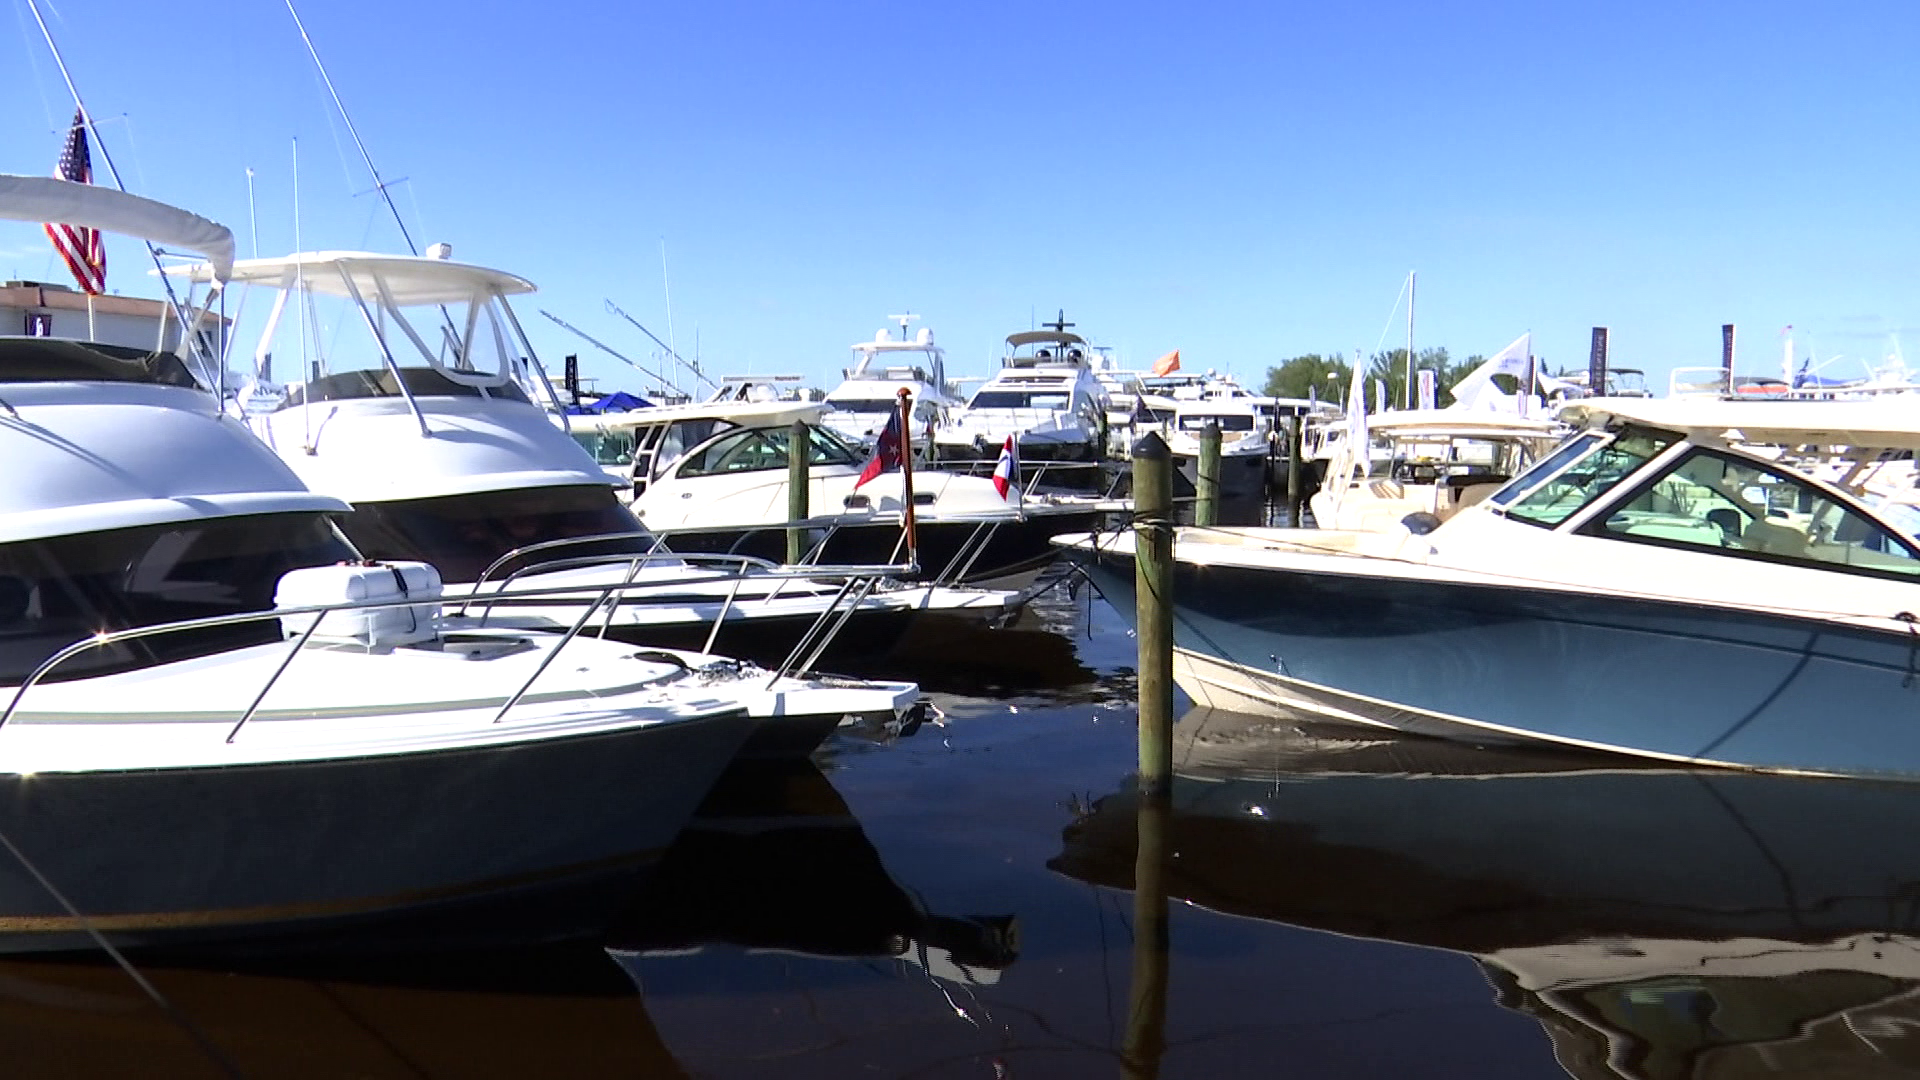 48th Annual Fort Myers Boat Show on until Sunday